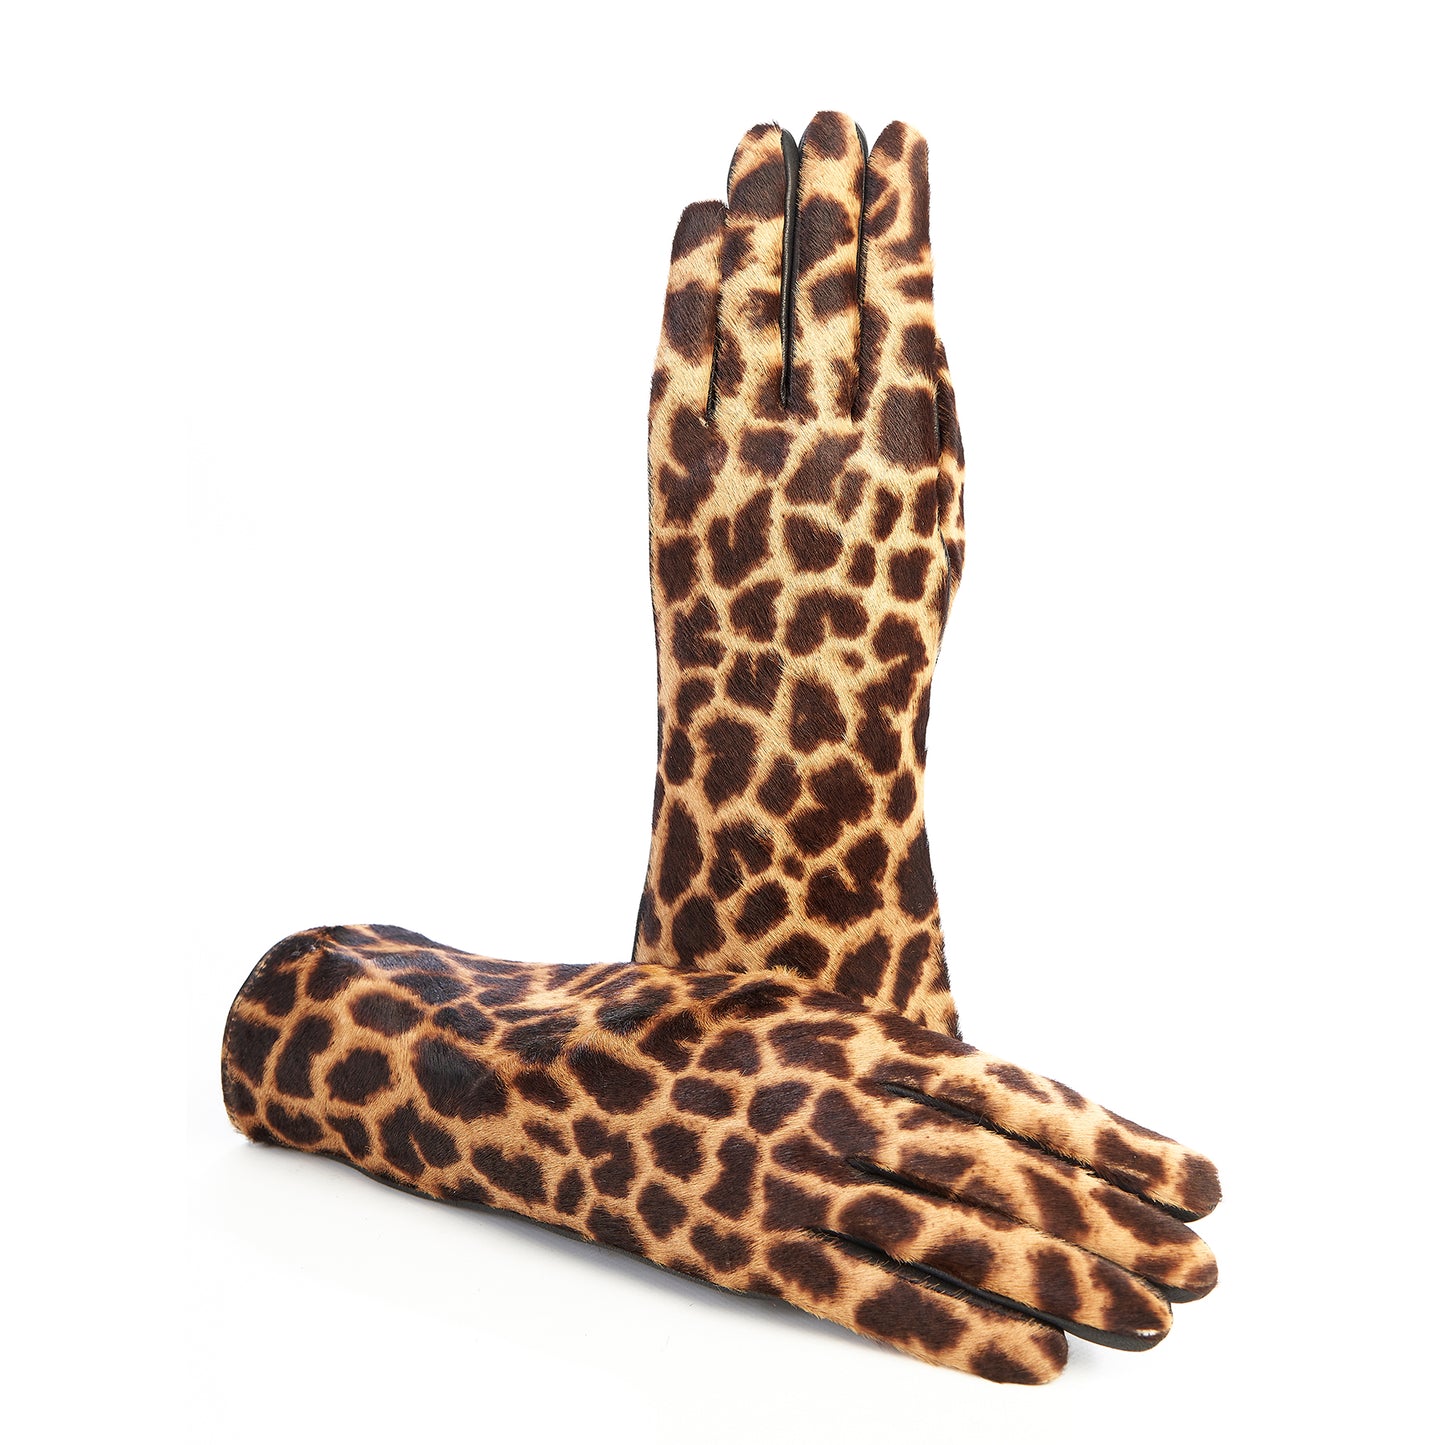 Ladies' leather gloves with yellow leo printed calfskin top details